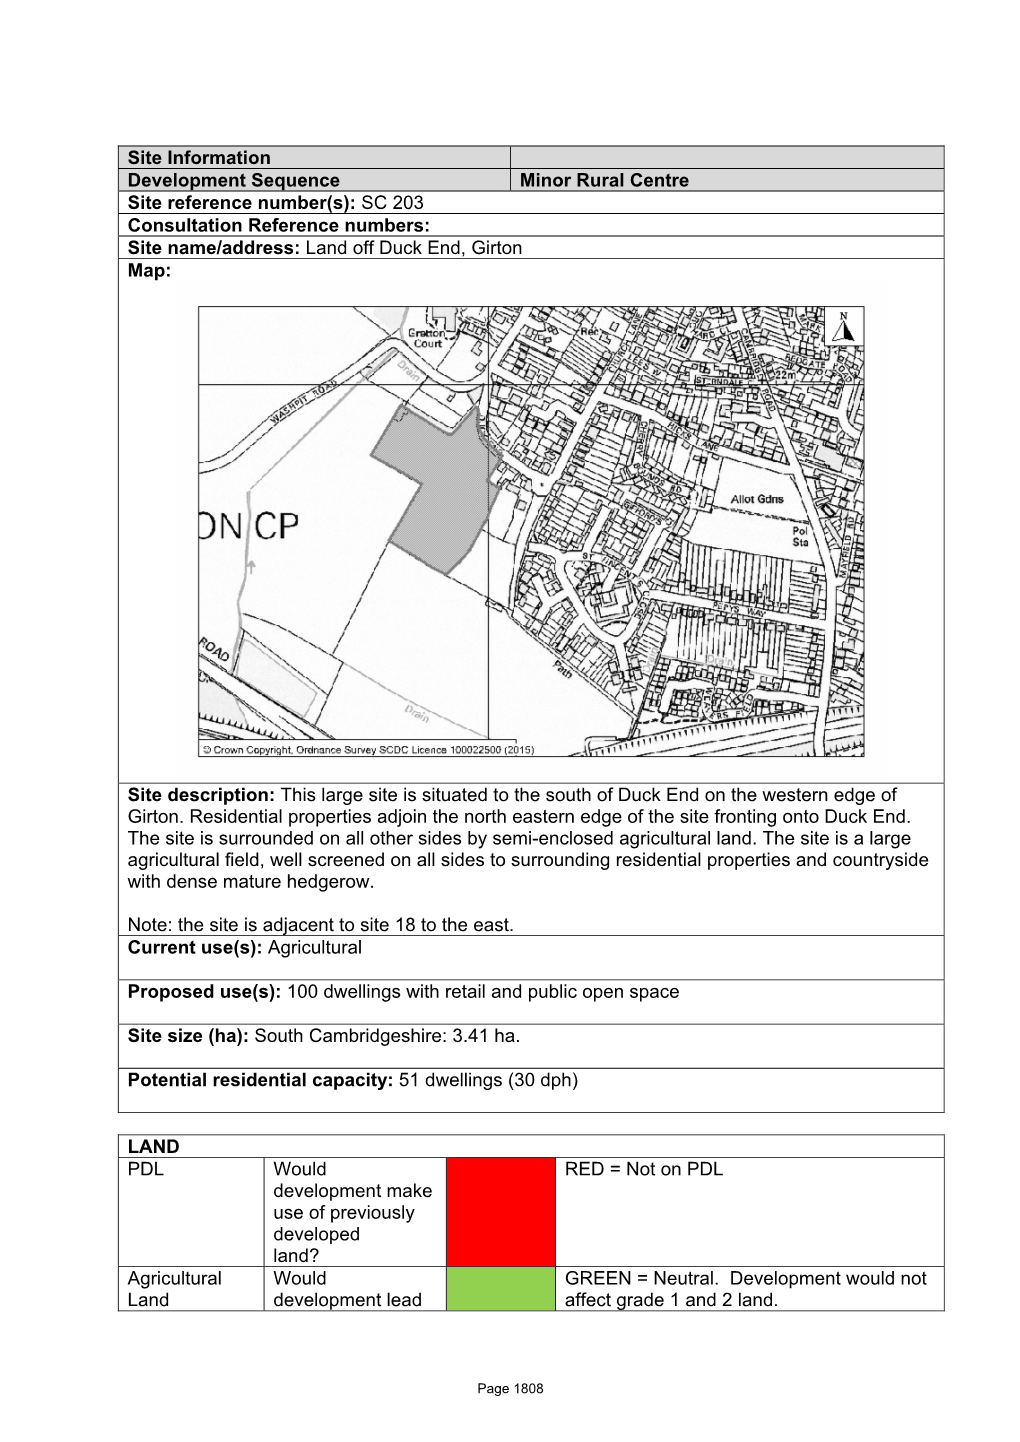 Site Information Development Sequence Minor Rural Centre Site Reference Number(S)